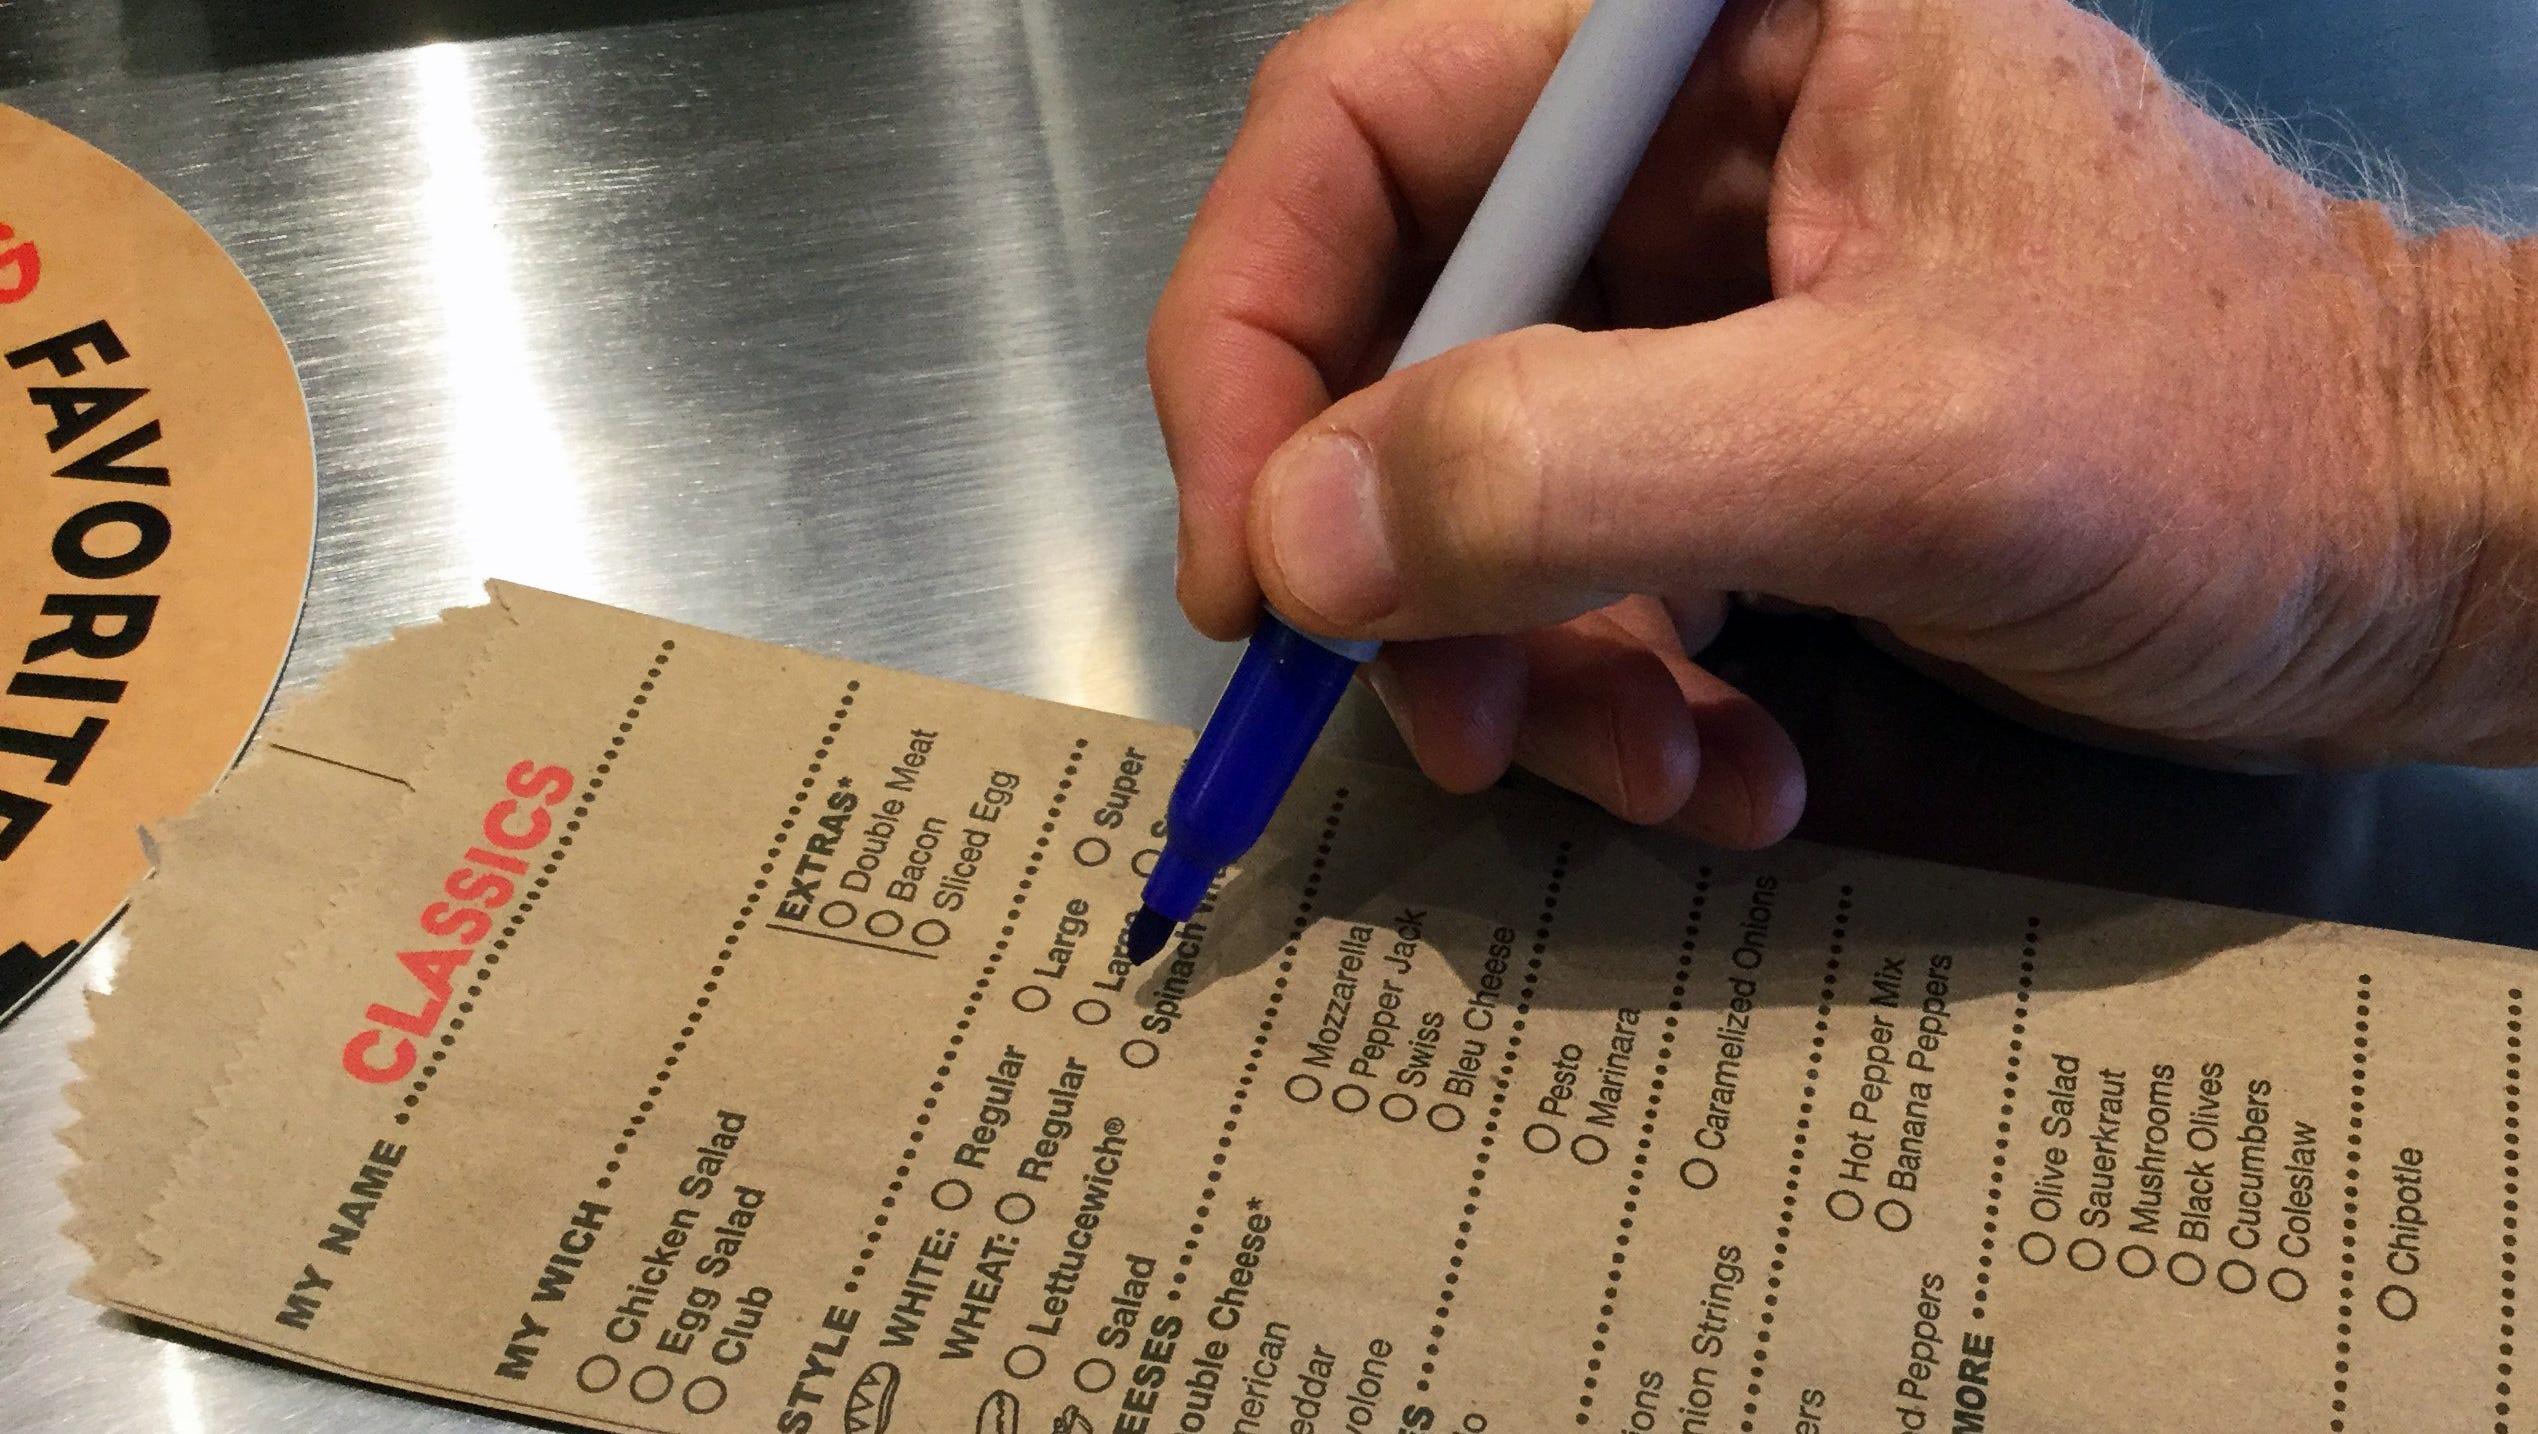 There is no pressure or time limit when ordering a sandwich at Which Wich. Customers can take their time building their favorite sub using order sandwich bags.